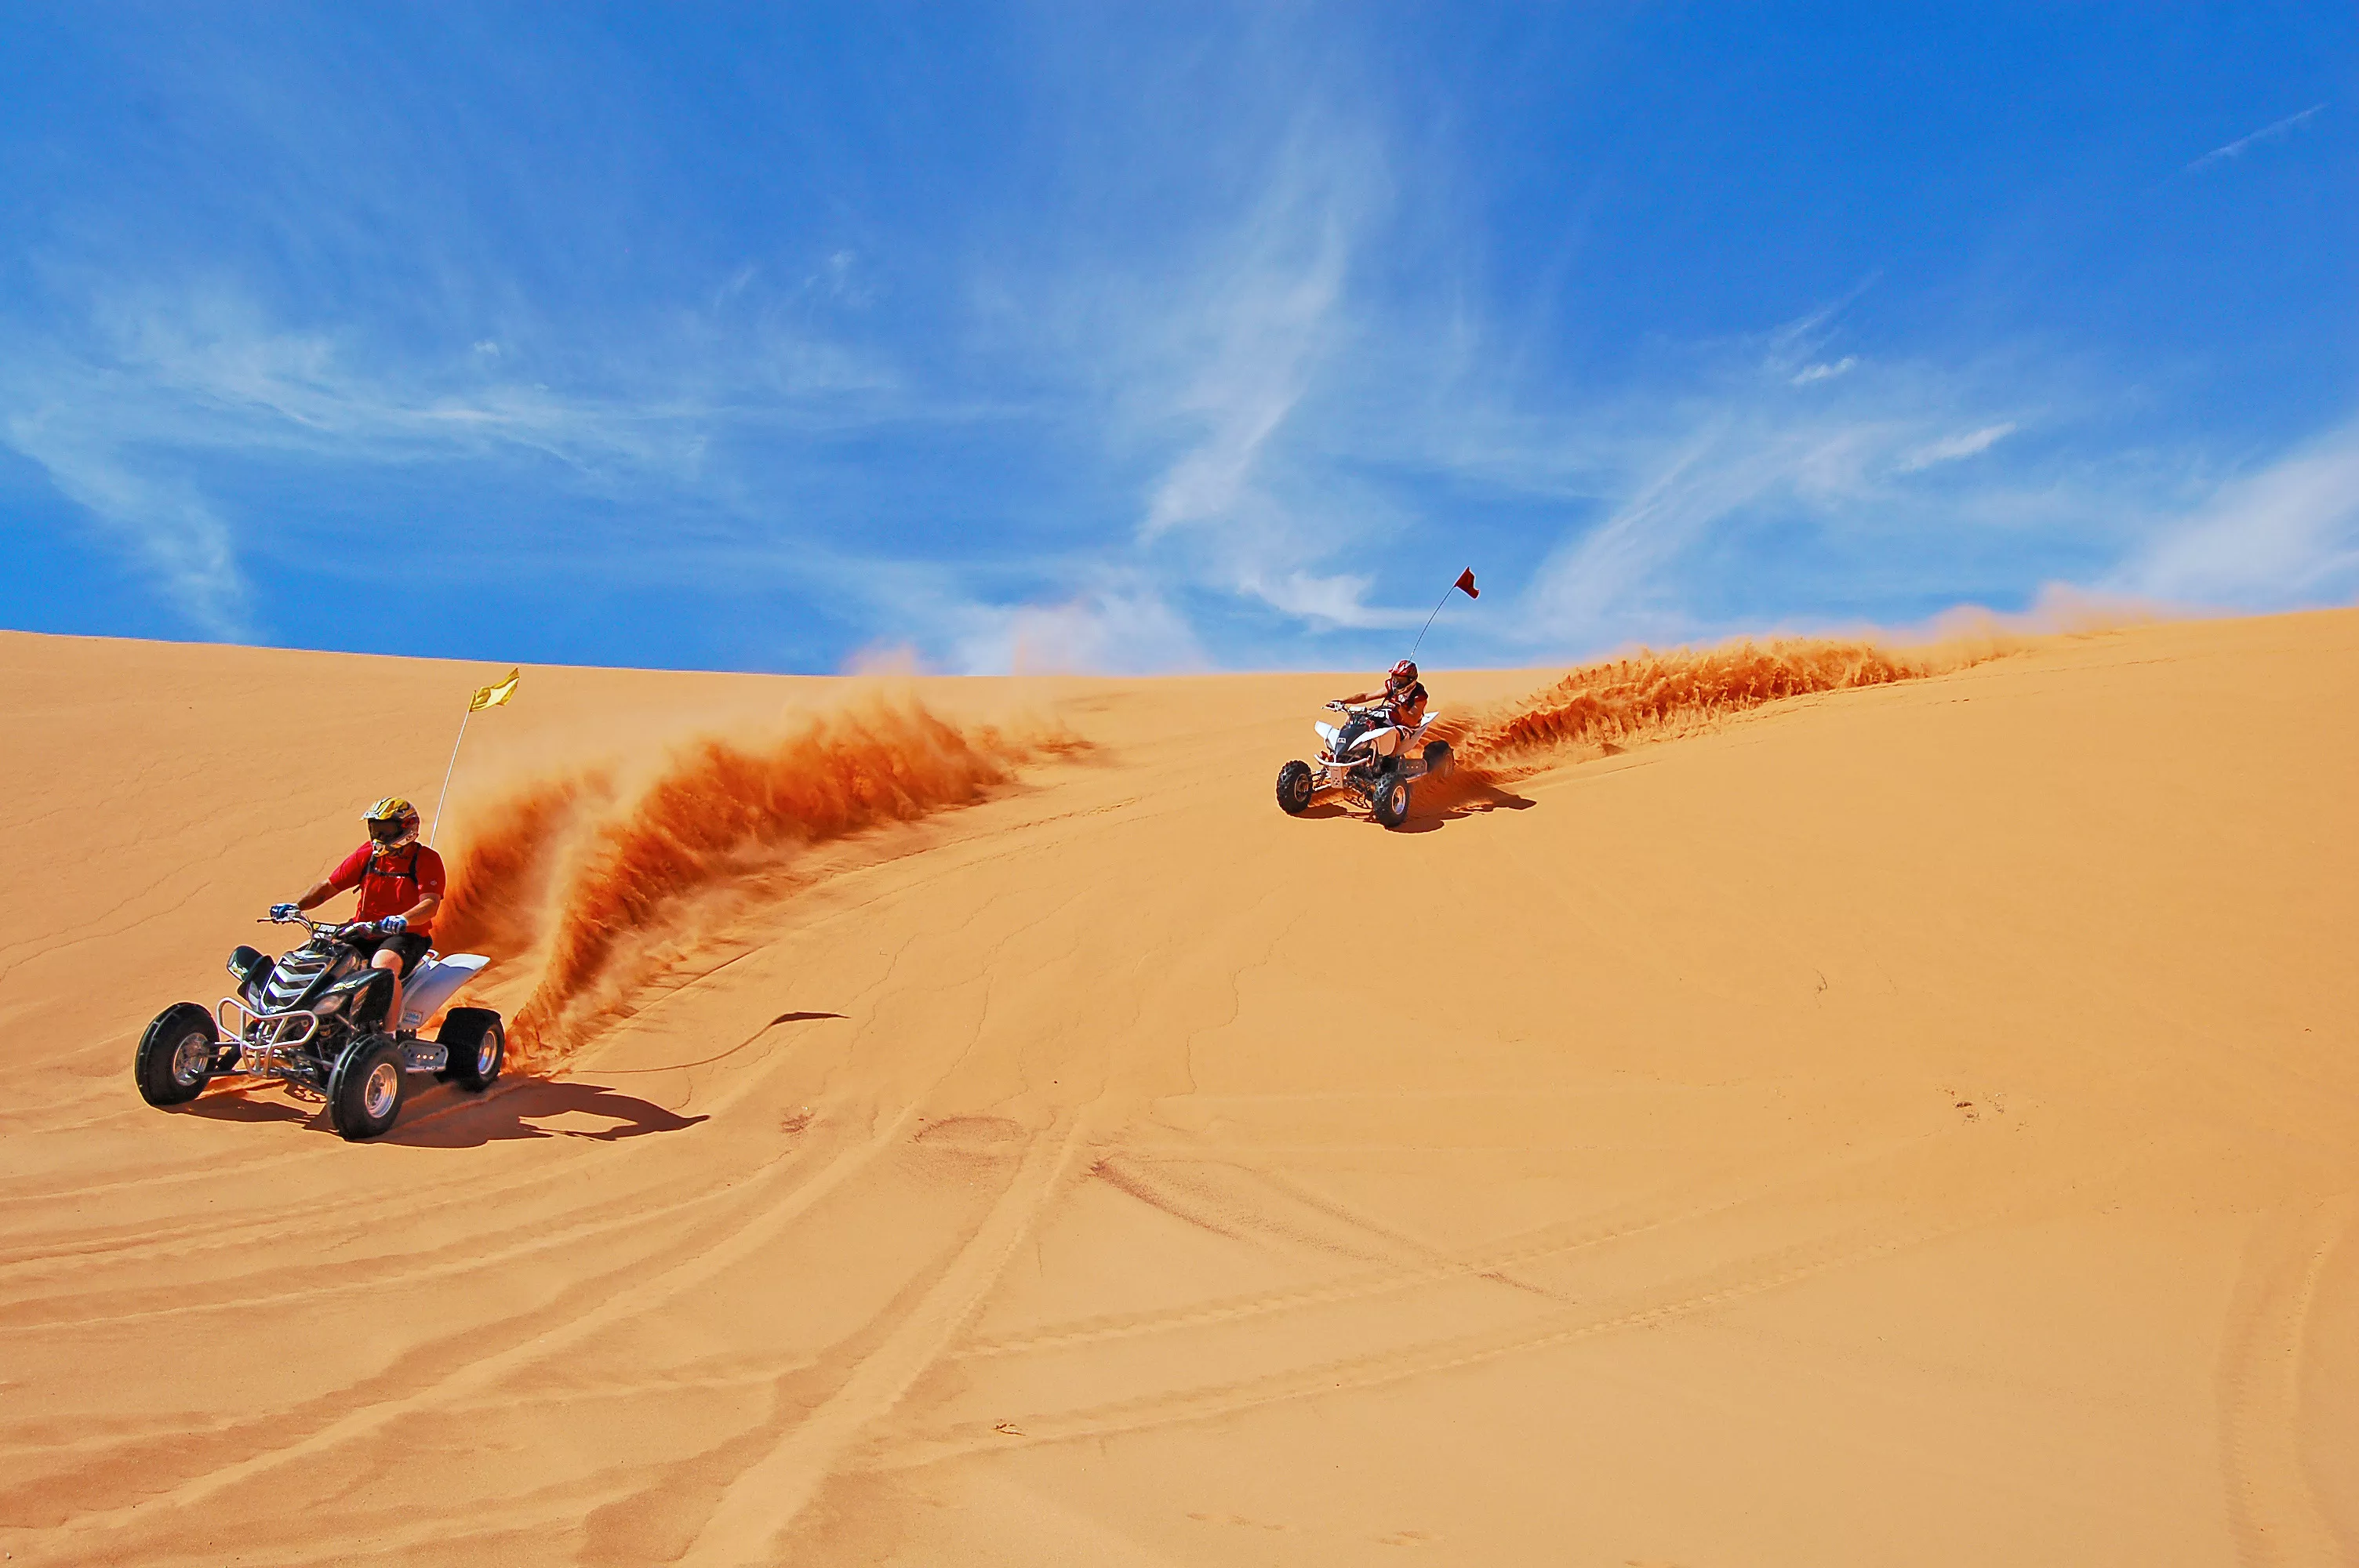 Moses Lake Sand Dunes in USA, North America | Motorcycles,ATVs - Rated 4.2